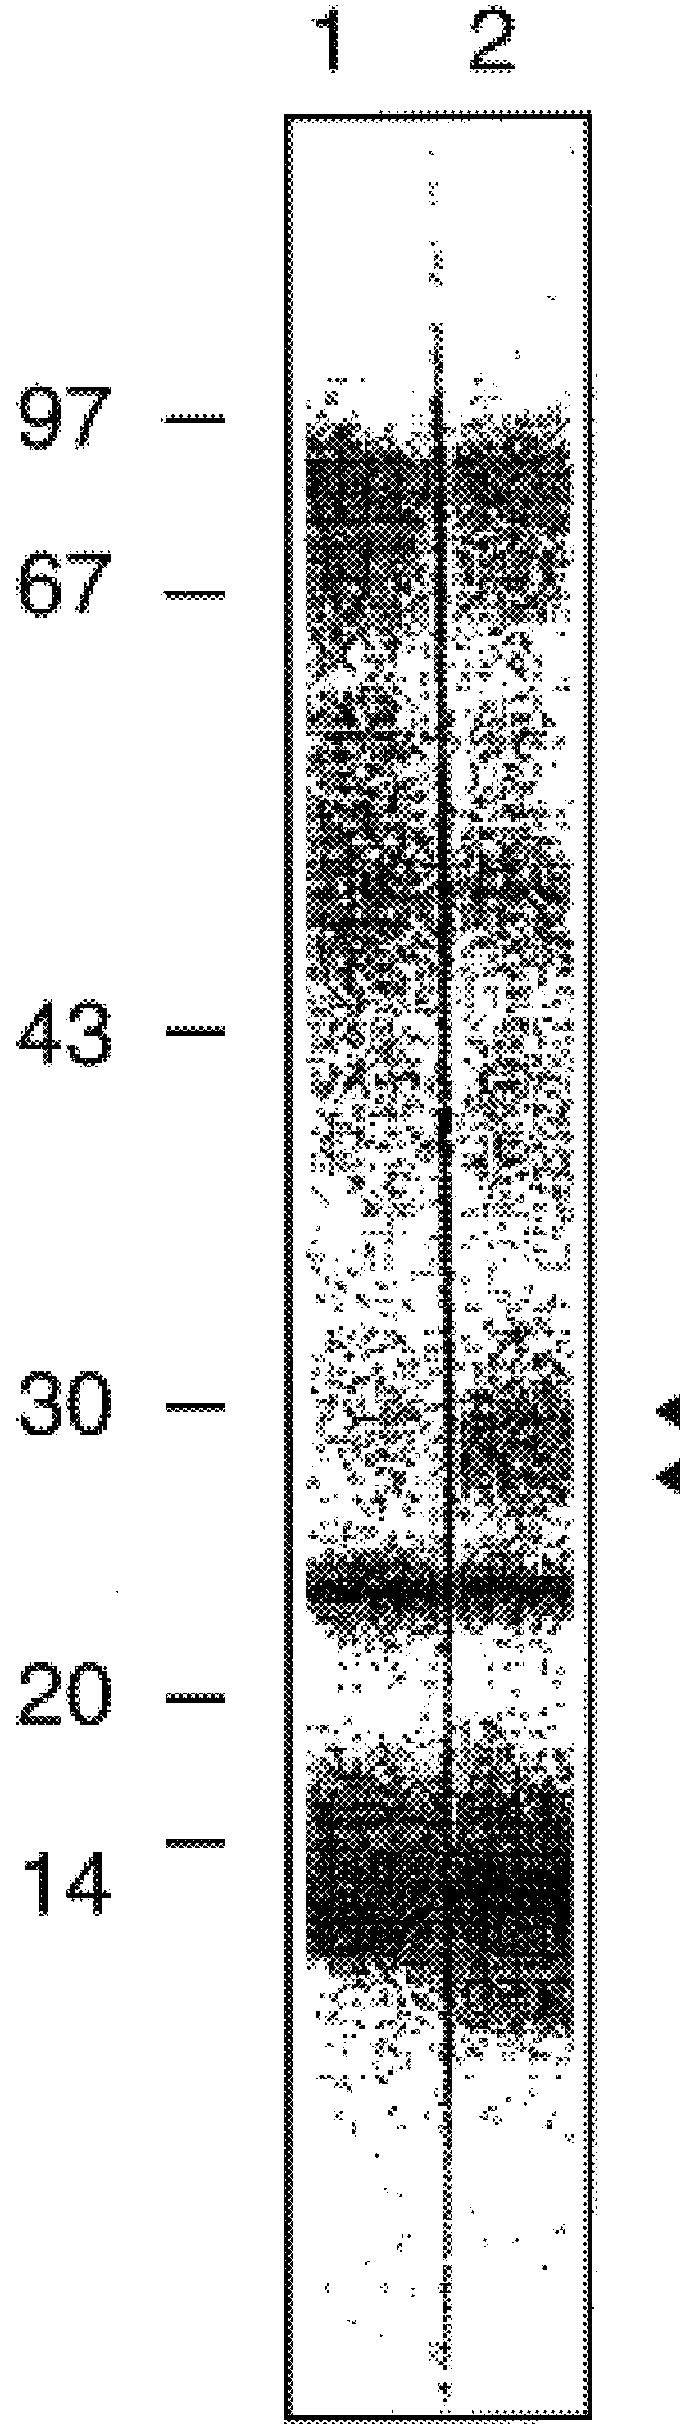 House dust mite allergen, Der p VII, and uses thereof